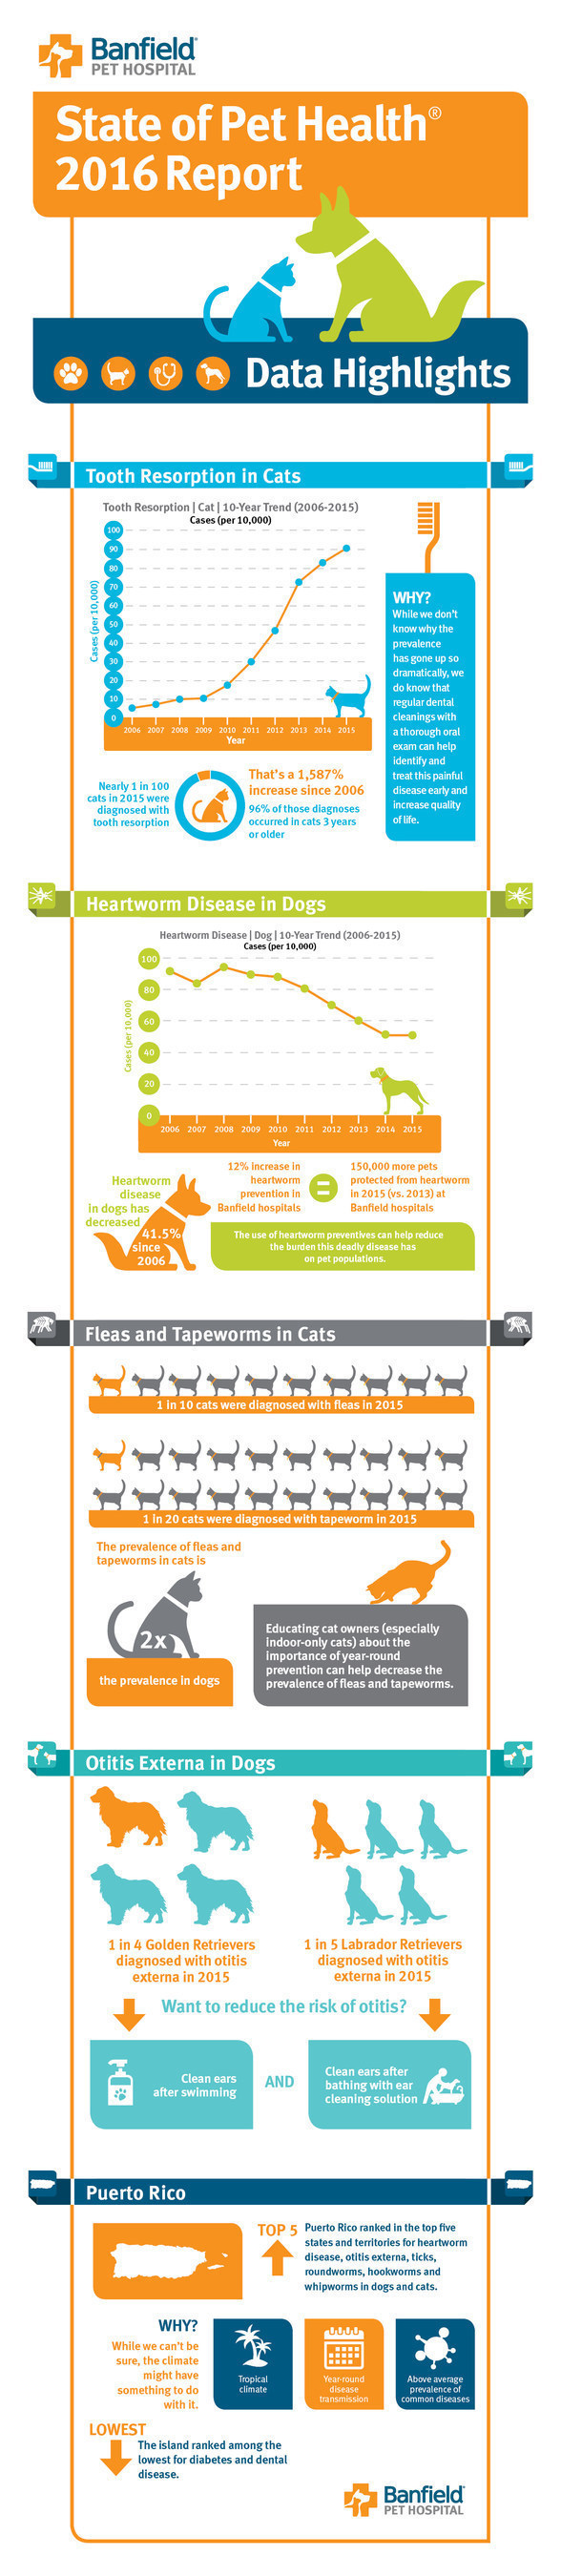 Banfield Pet Hospital State of Pet Health 2016 Report Infographic